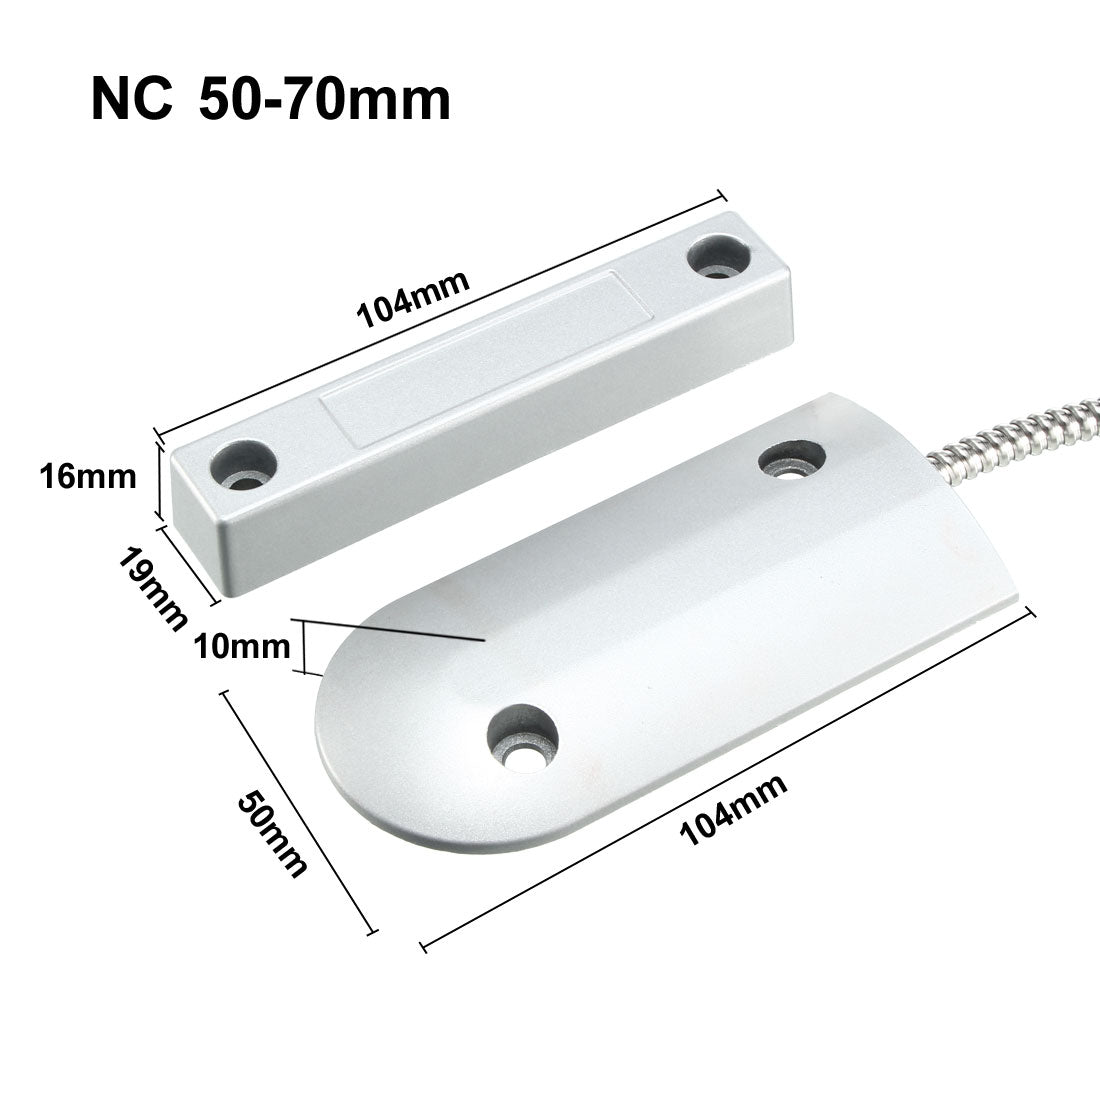 uxcell Uxcell OC-60B NC Nomally Closed Alarm Security Rolling Gate Garage Door Contact Magnetic Reed Switch